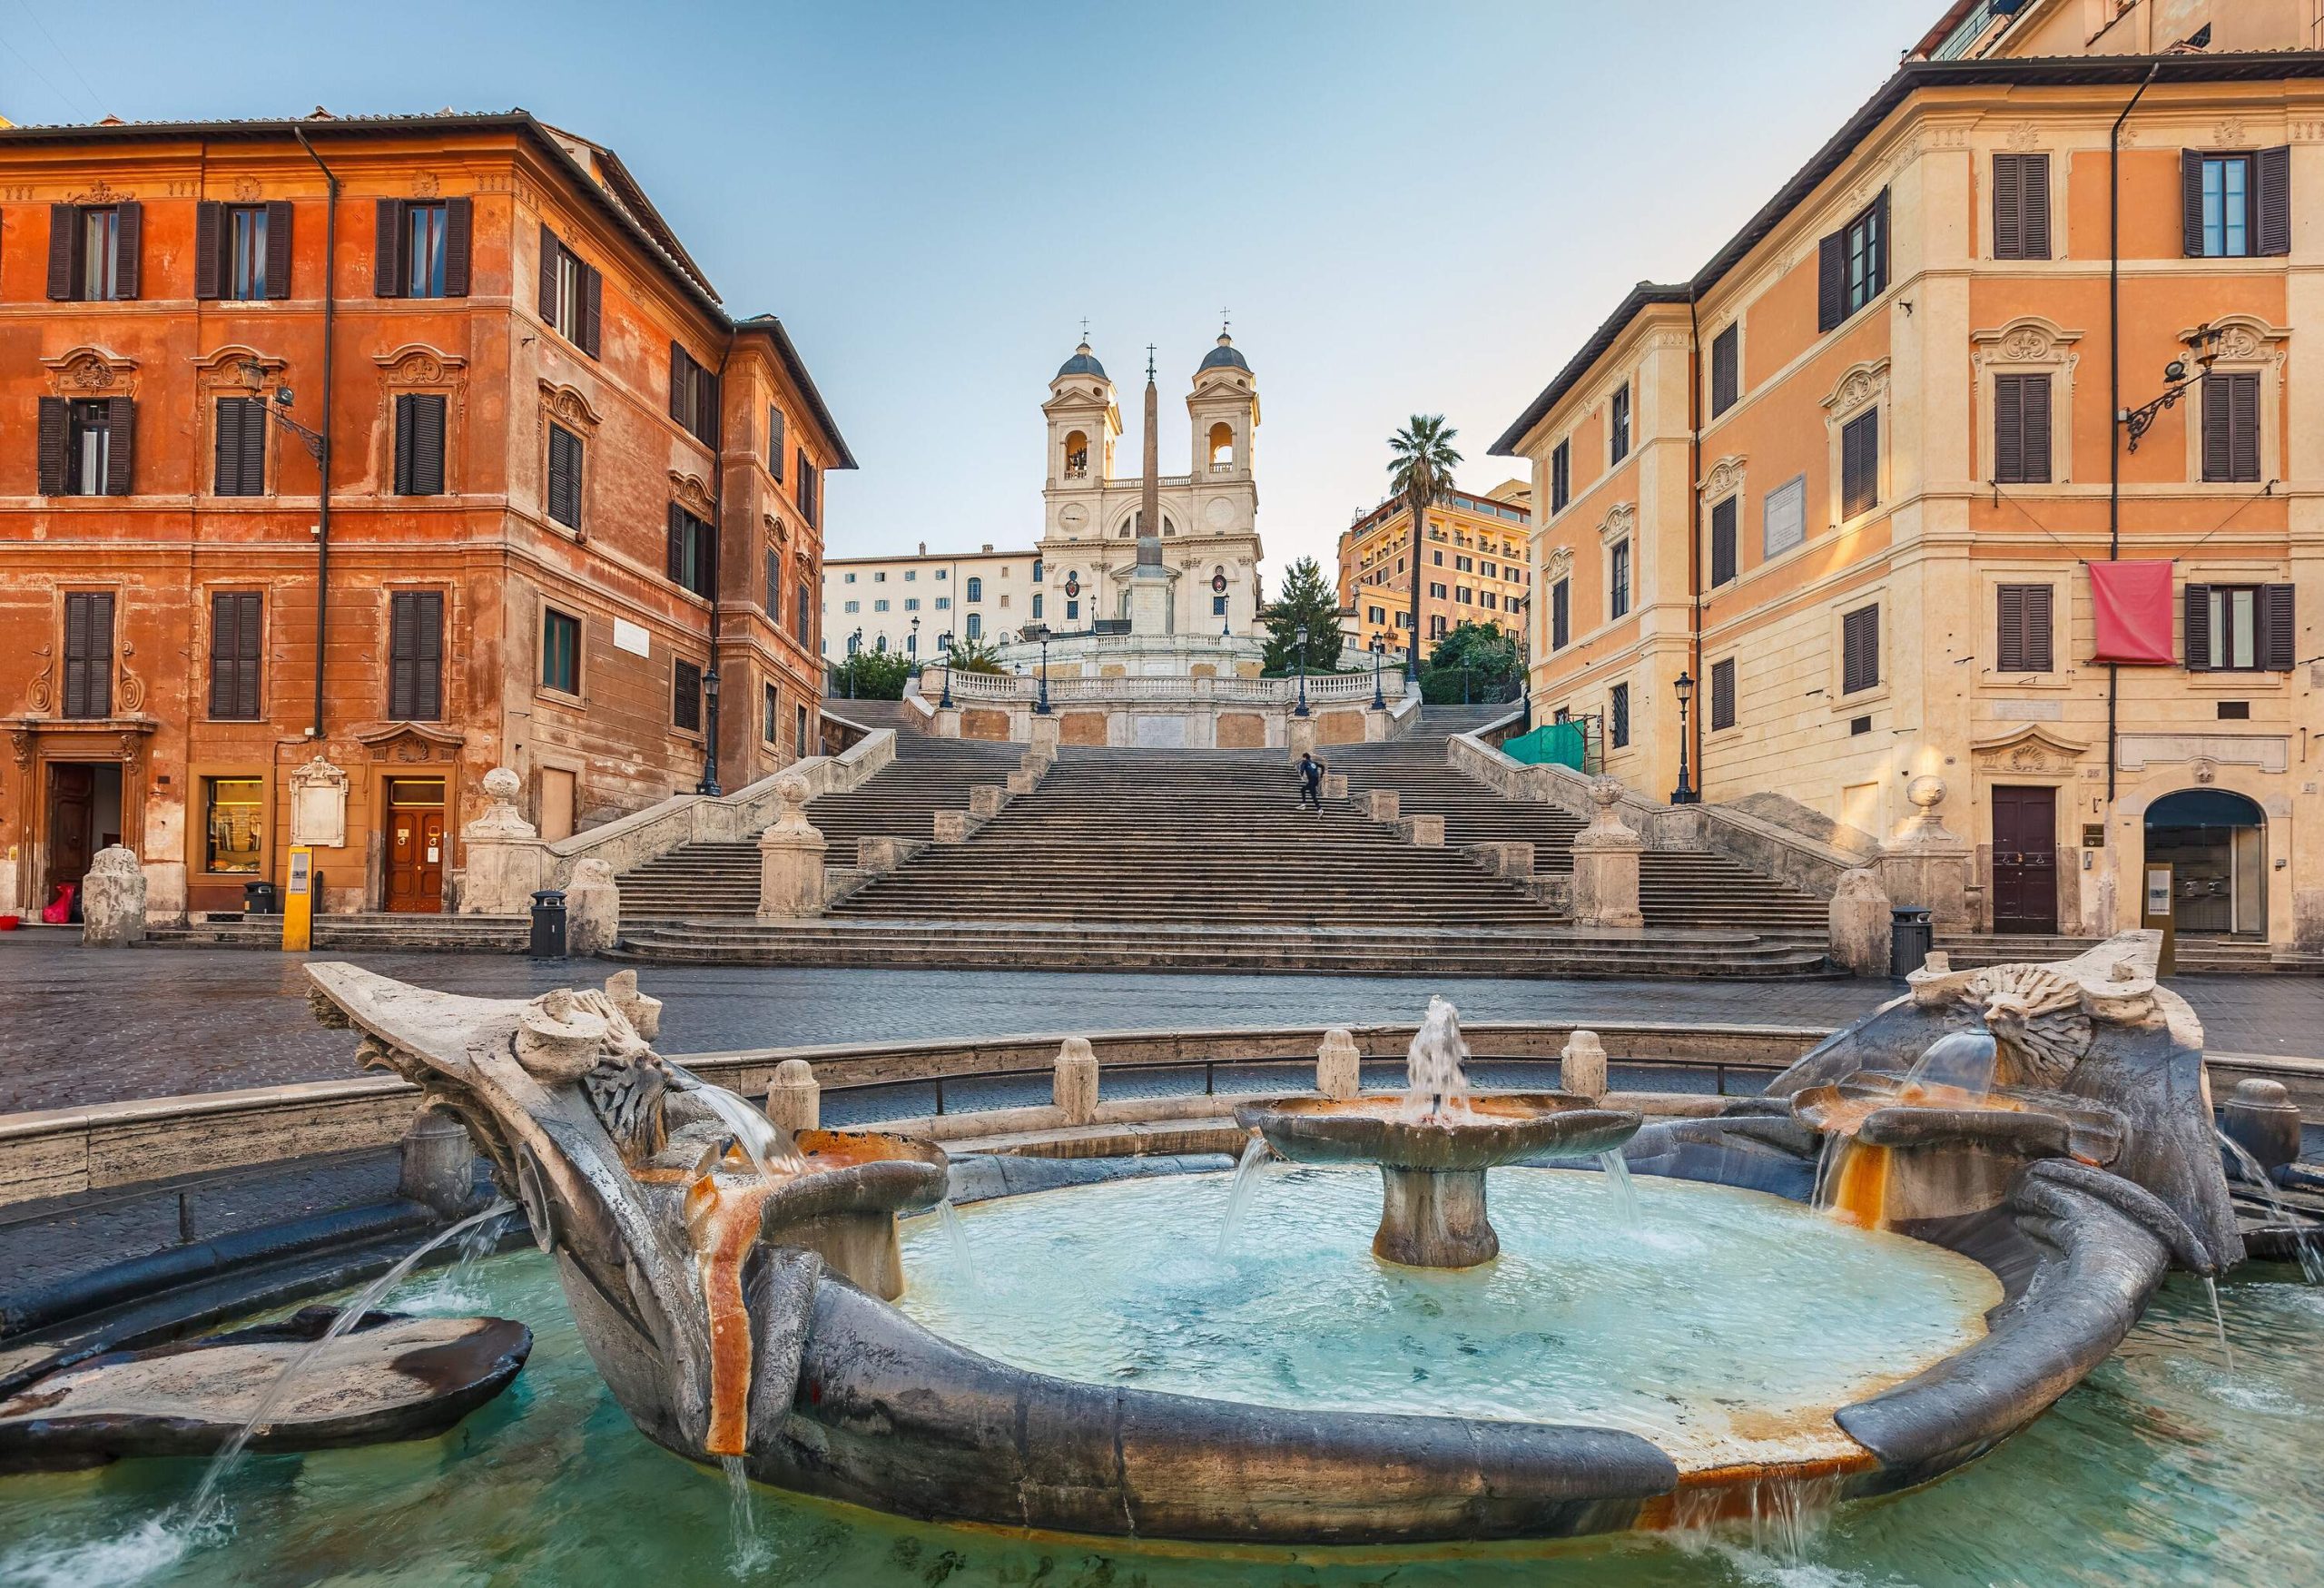 An ancient water fountain in front of the Spanish Steps and the Trinità dei Monti.